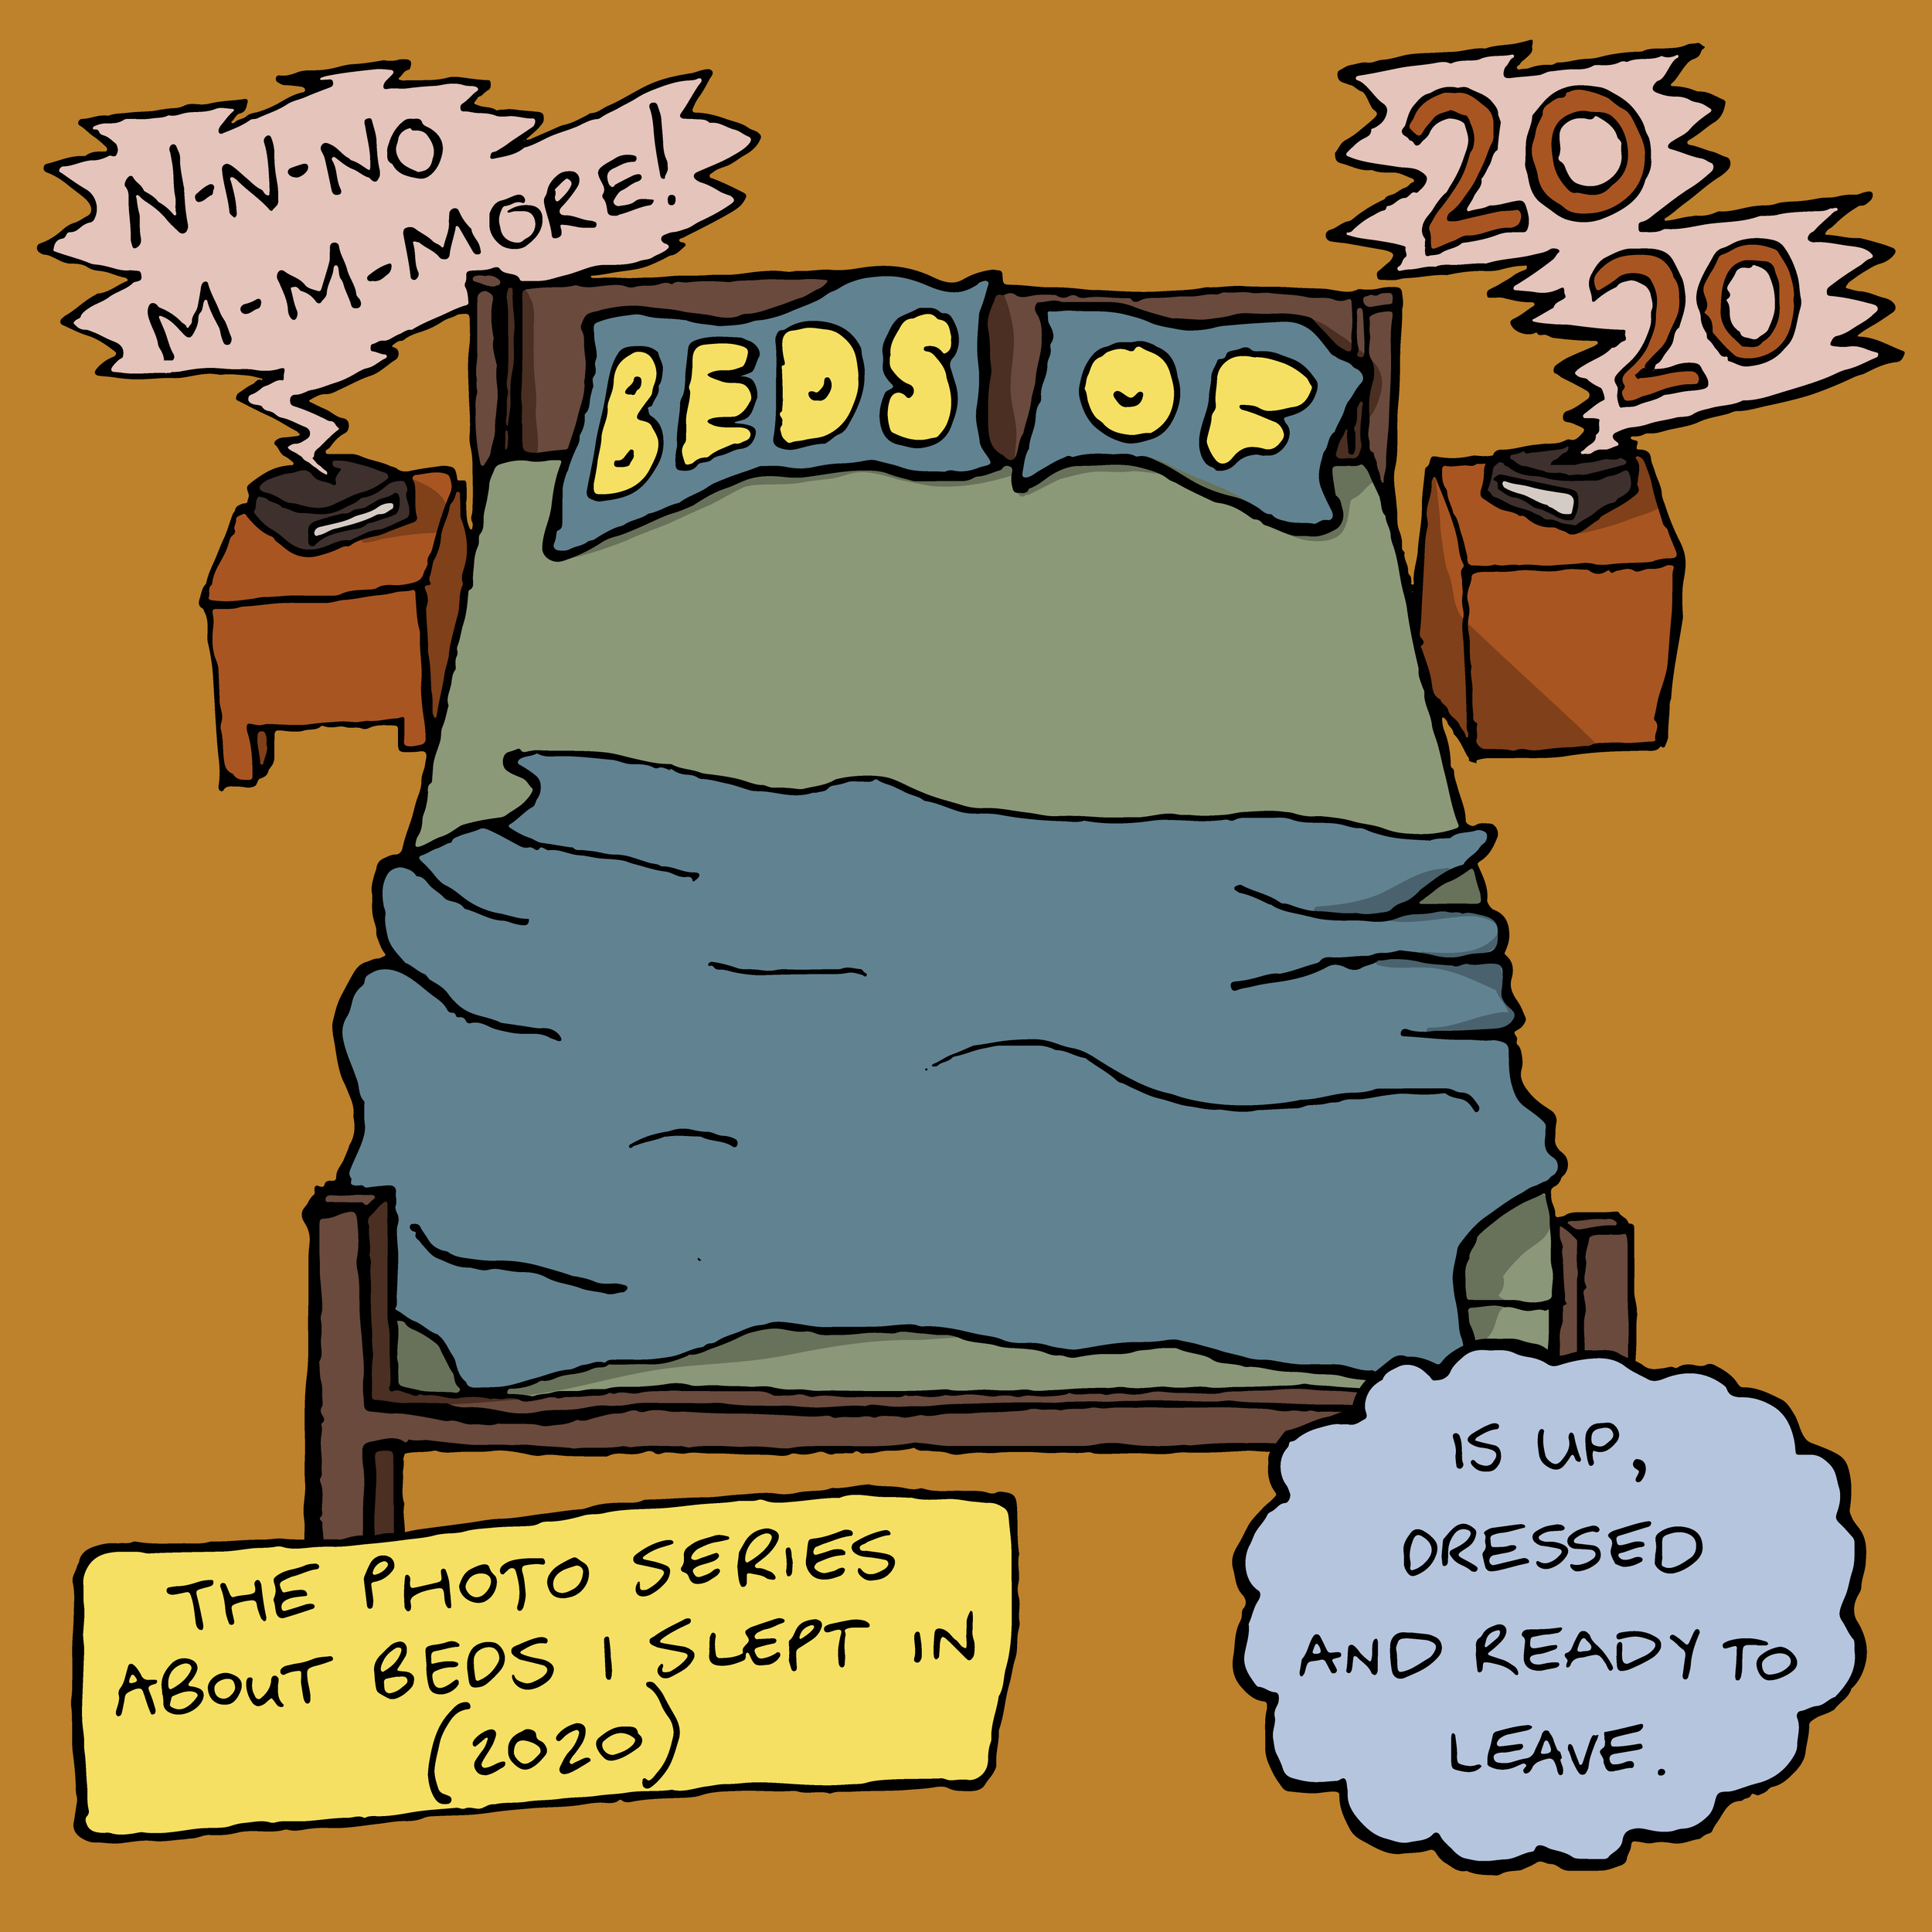 Beds0f2020-outro-01.png